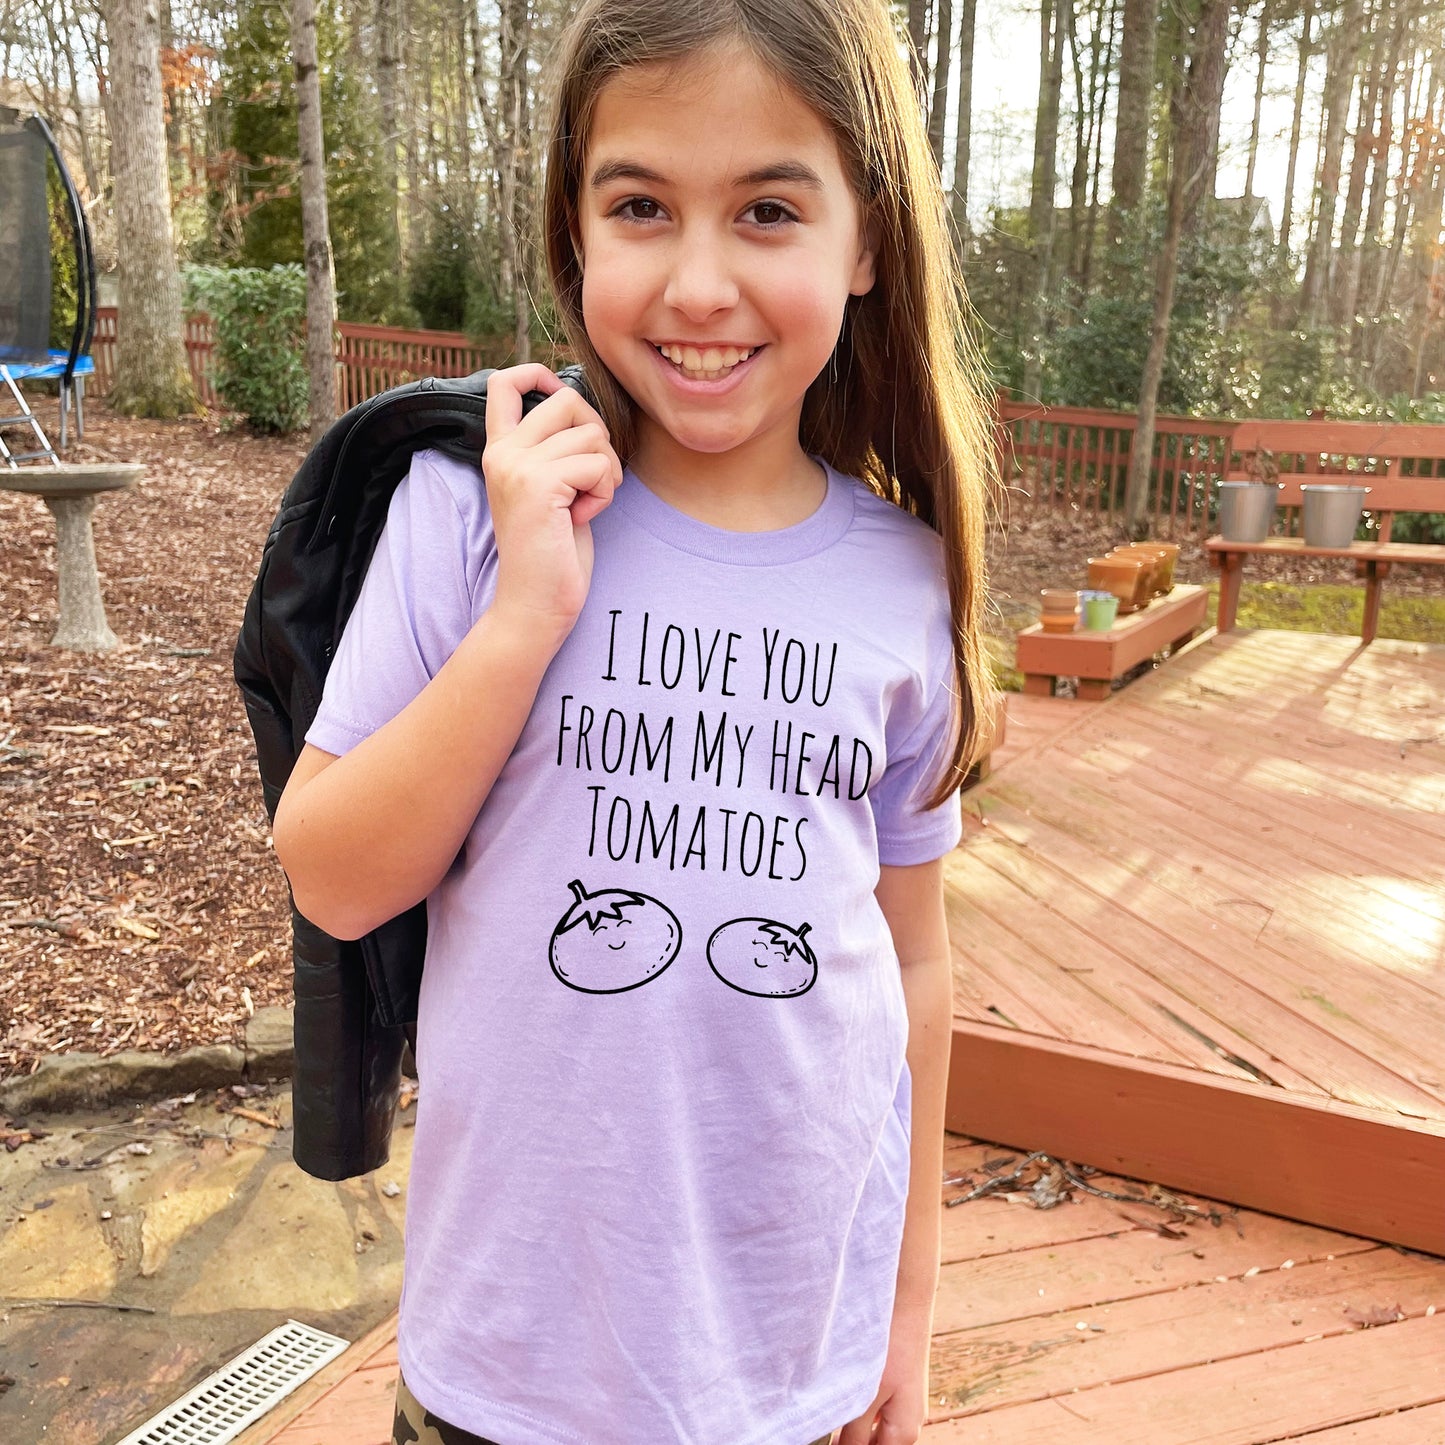 I Love You From My Head Tomatoes - Kid's Tee - Columbia Blue or Lavender